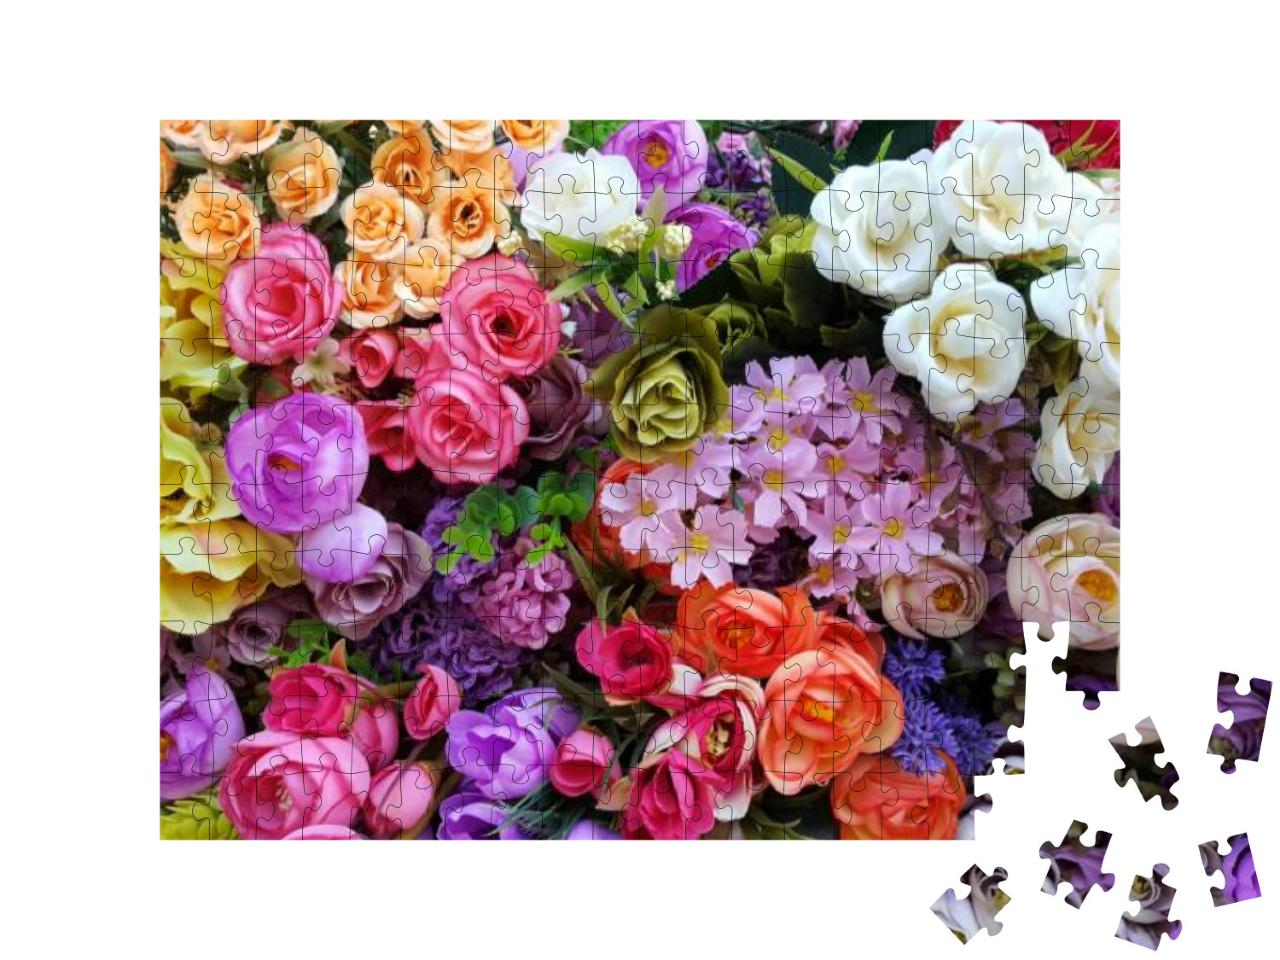 Irregularly Placed Flowers in Various Colors... Jigsaw Puzzle with 200 pieces